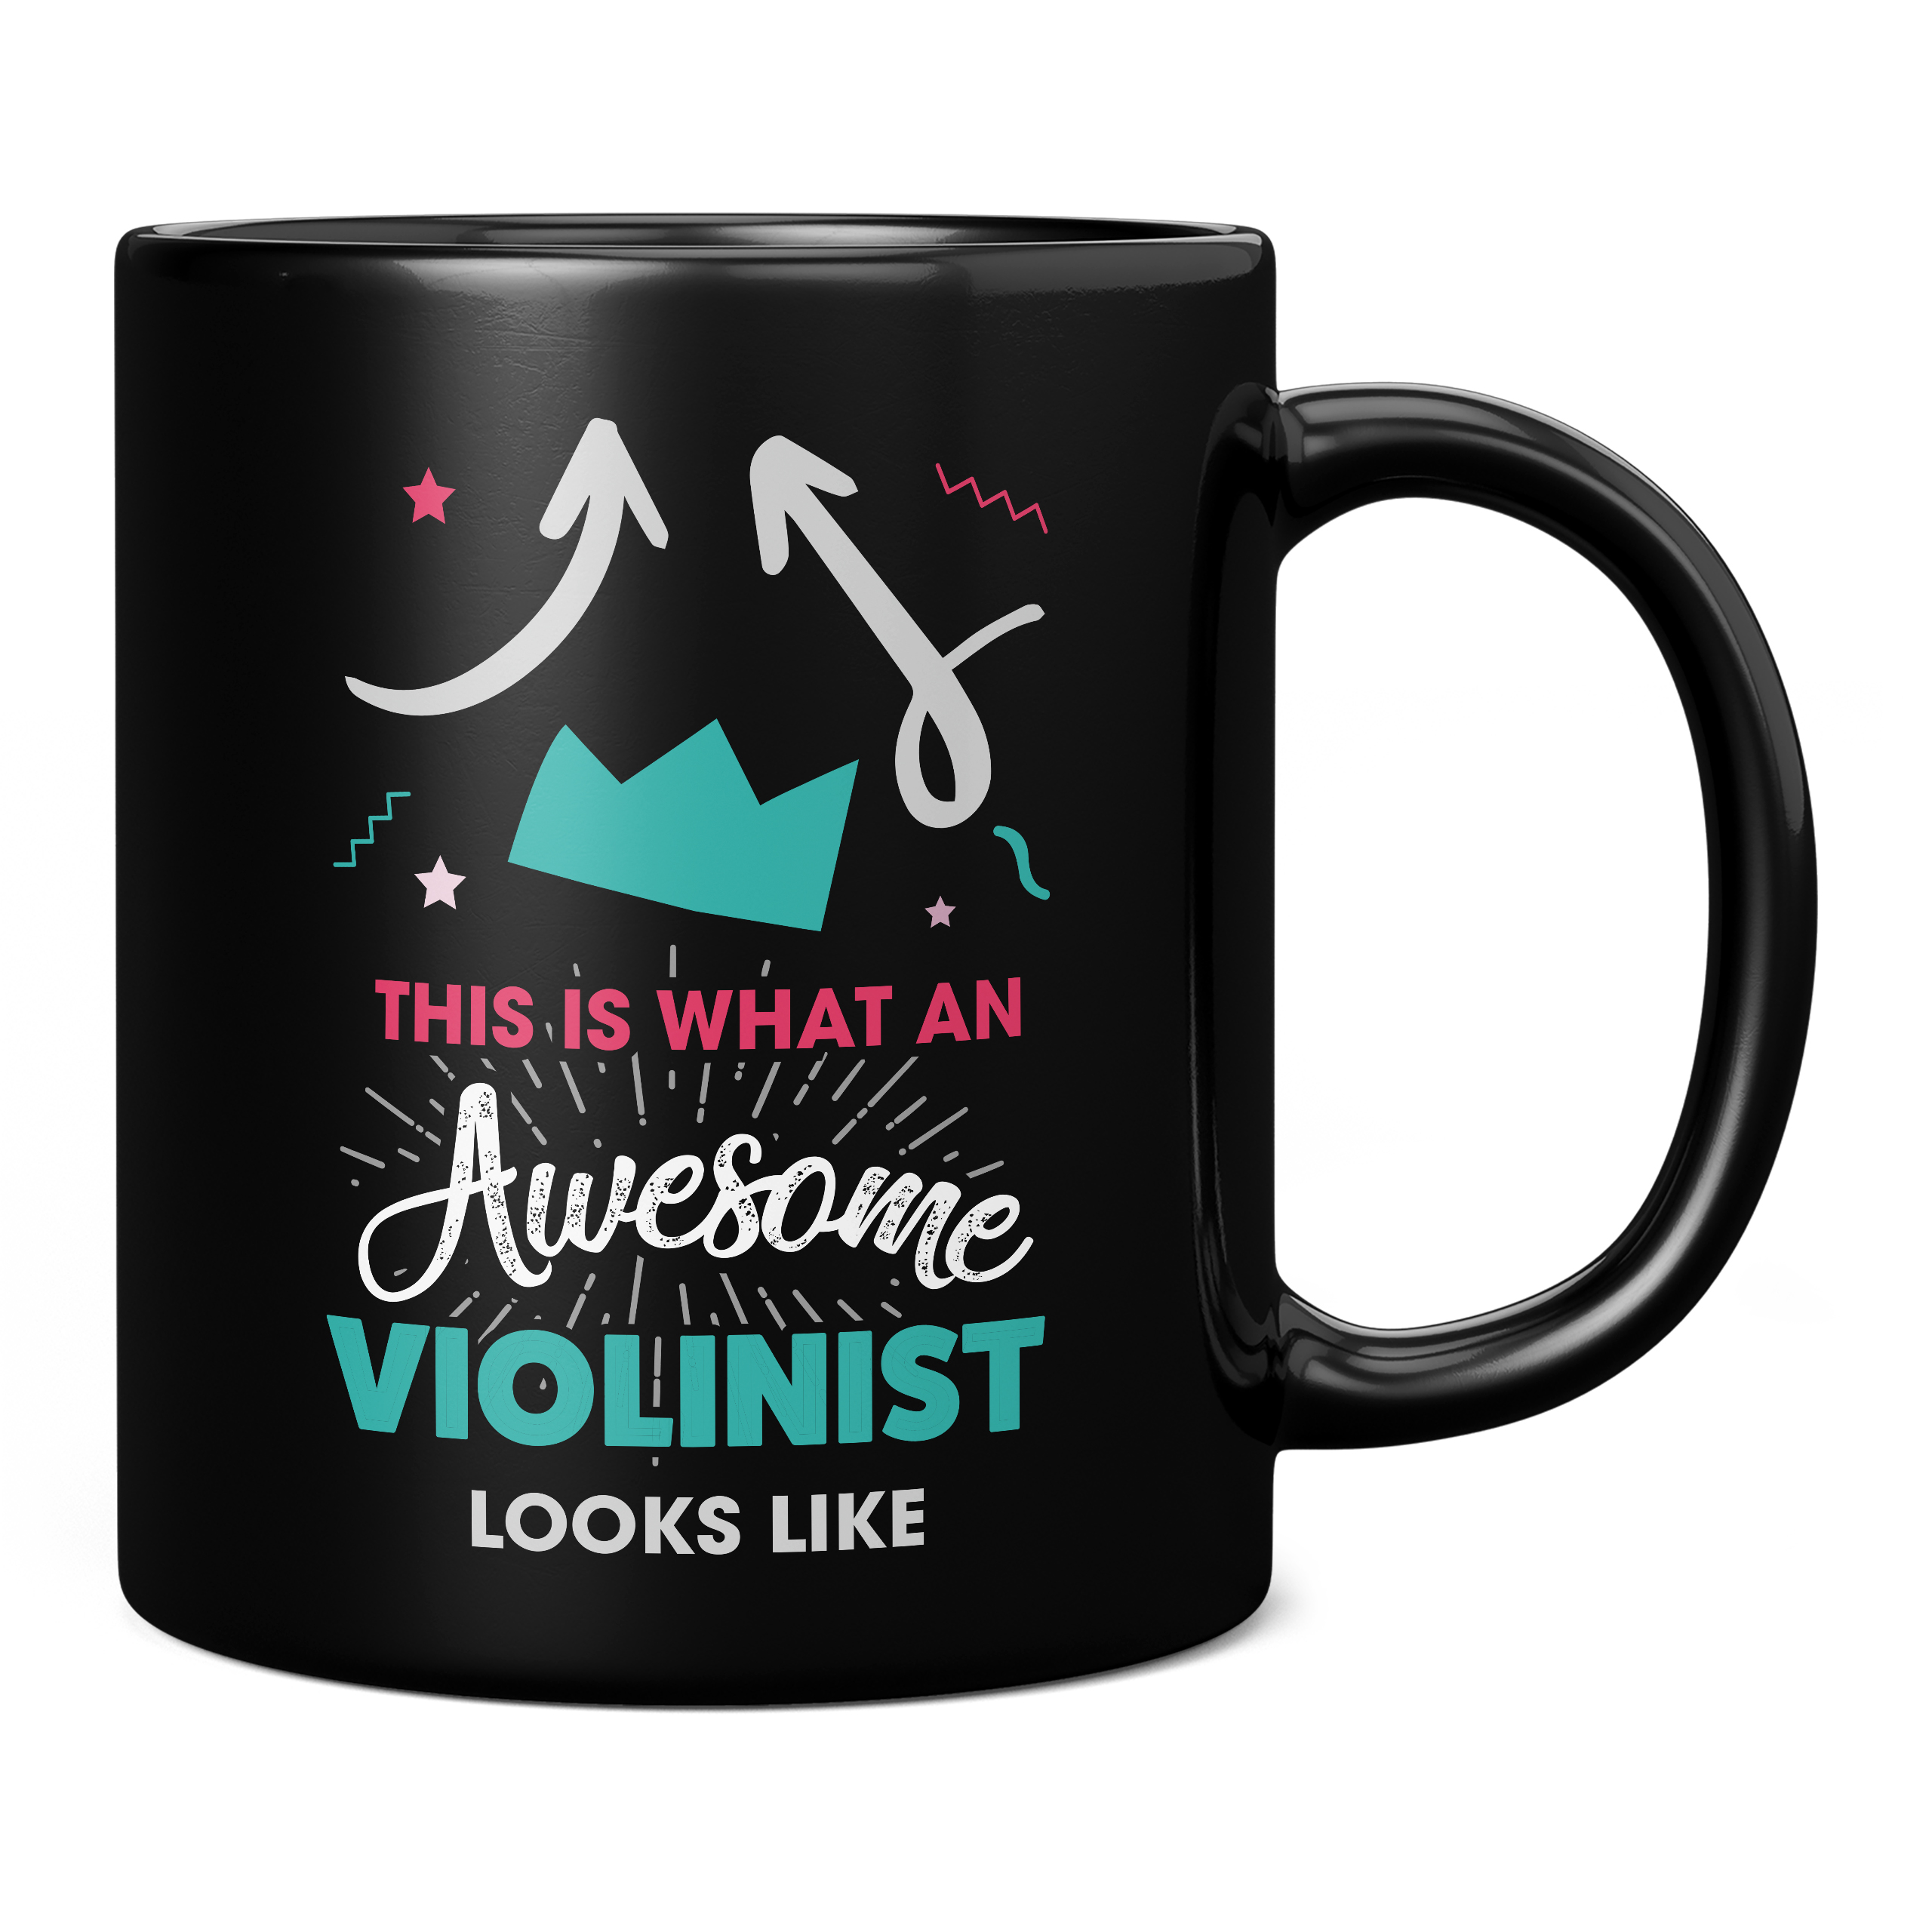 THIS IS WHAT AN AWESOME VIOLINIST LOOKS LIKE 11OZ NOVELTY MUG